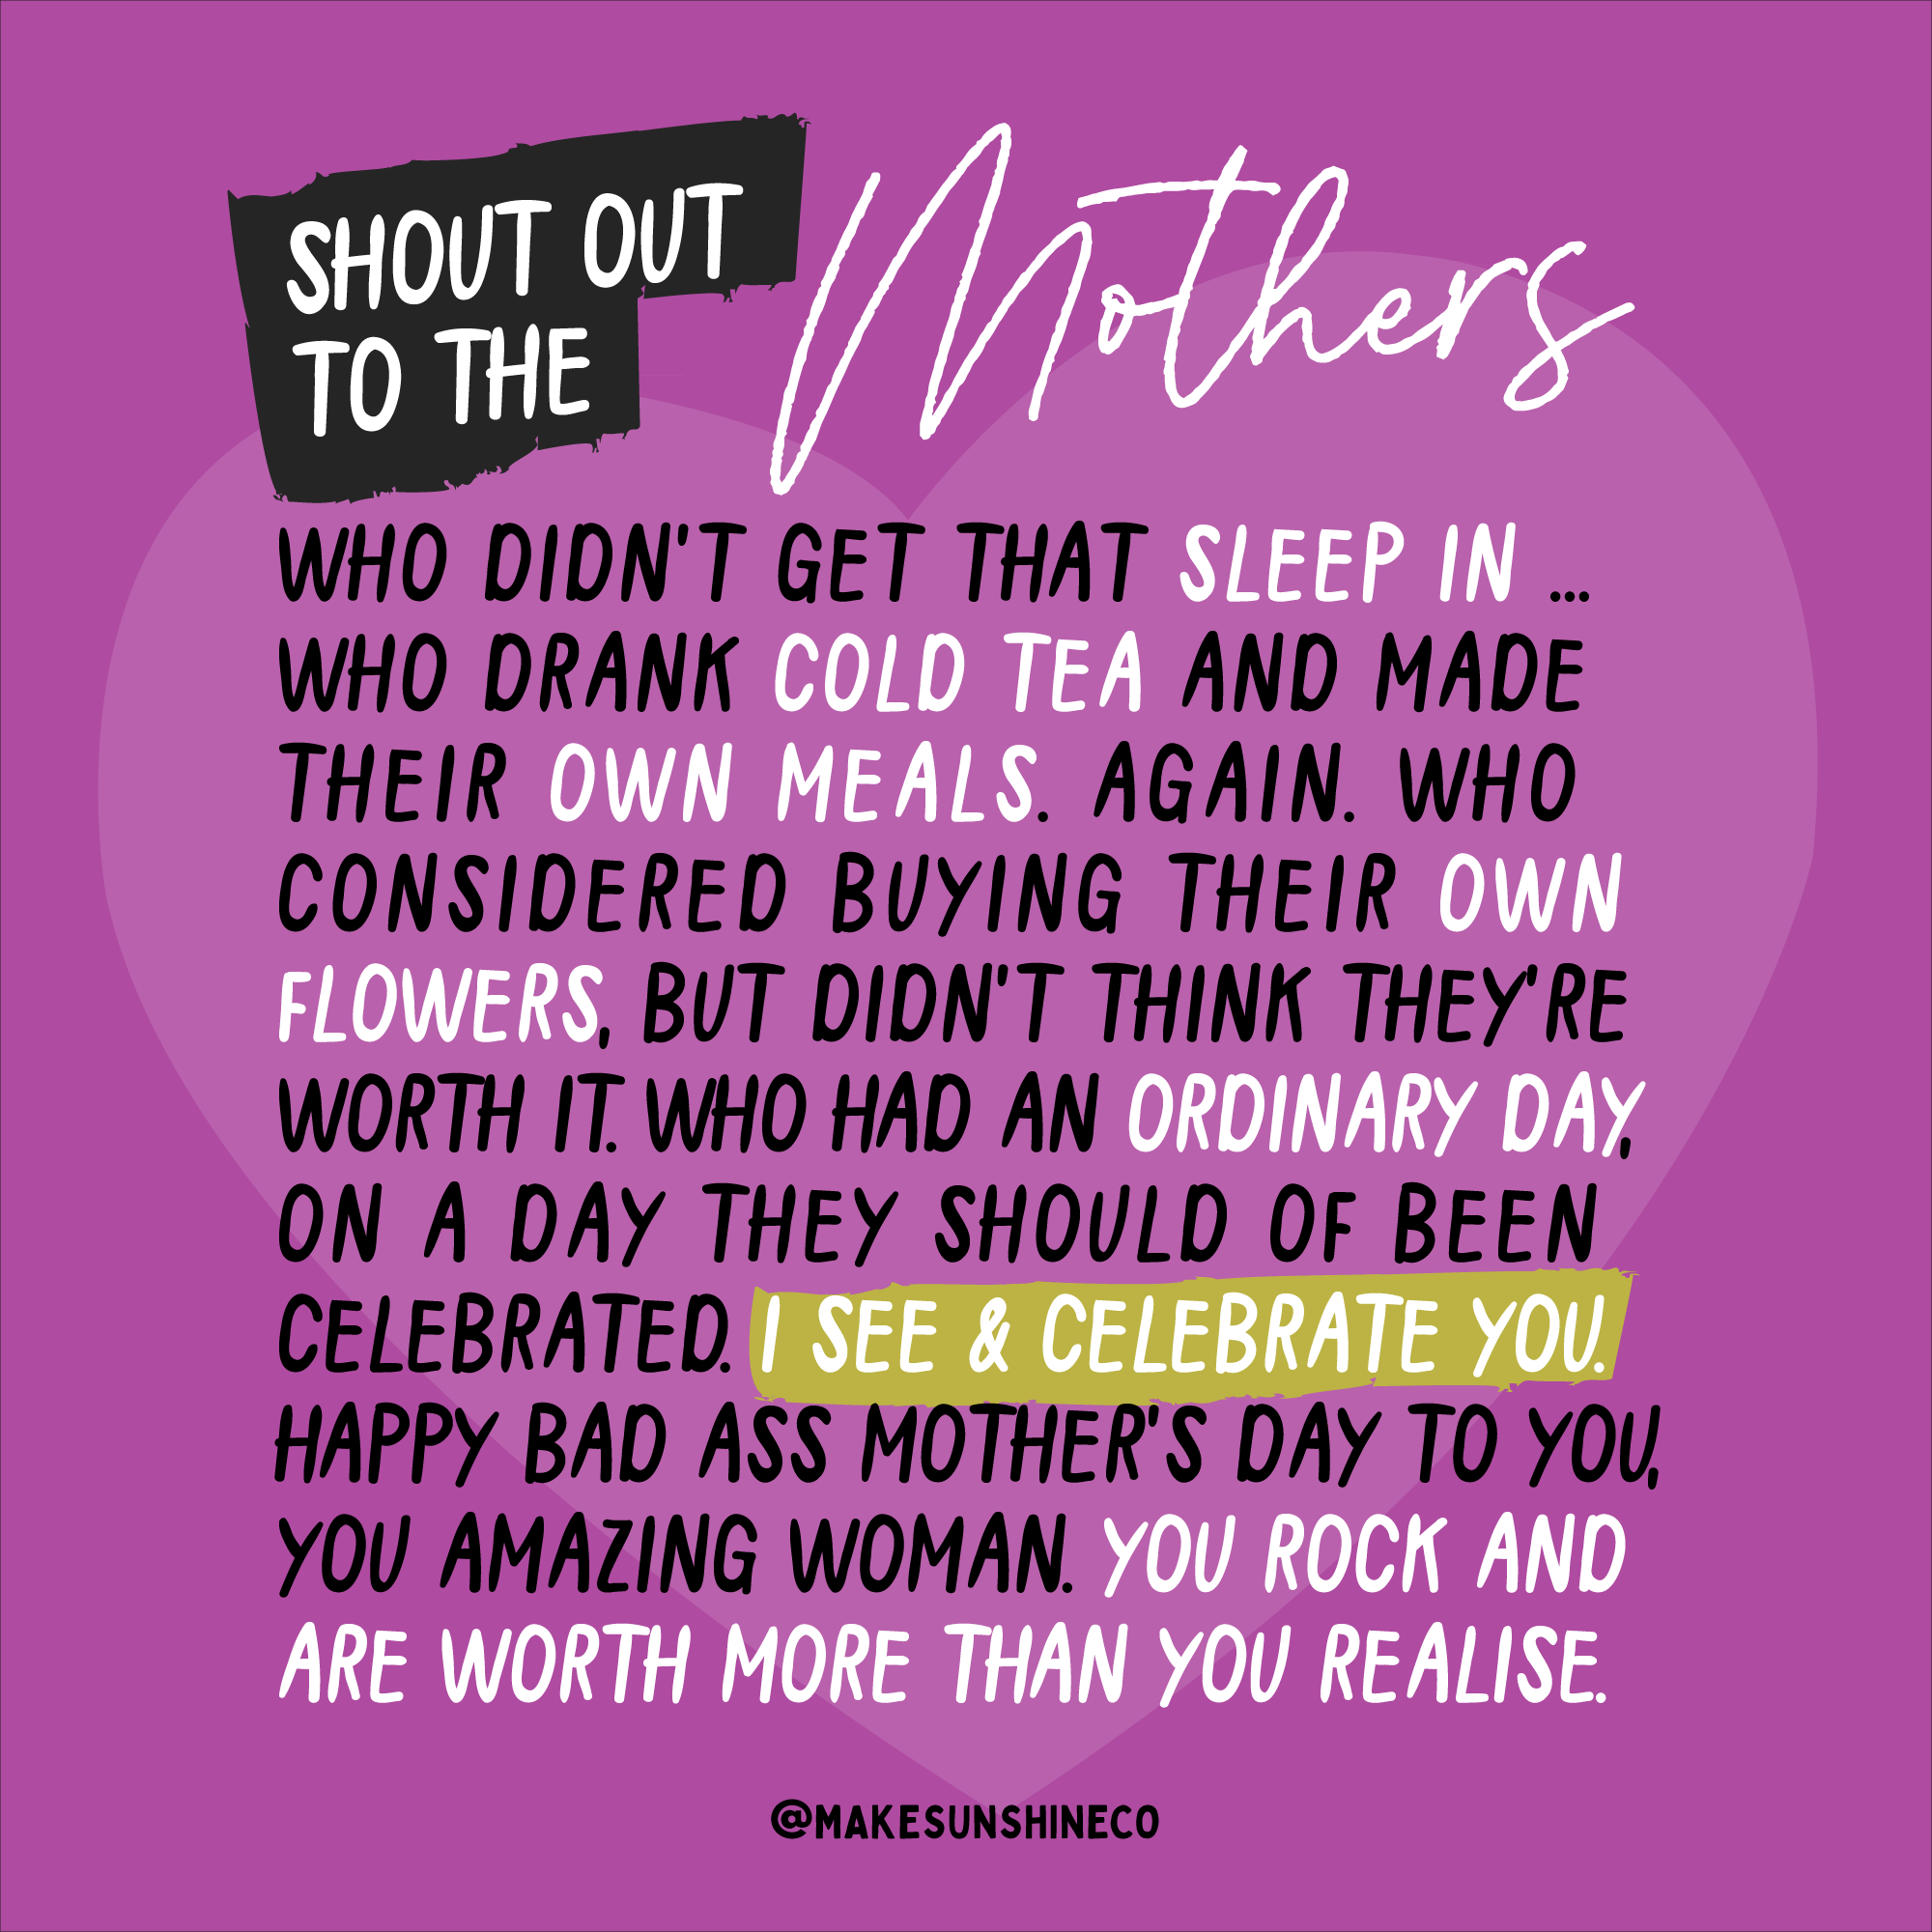 To all the mothers